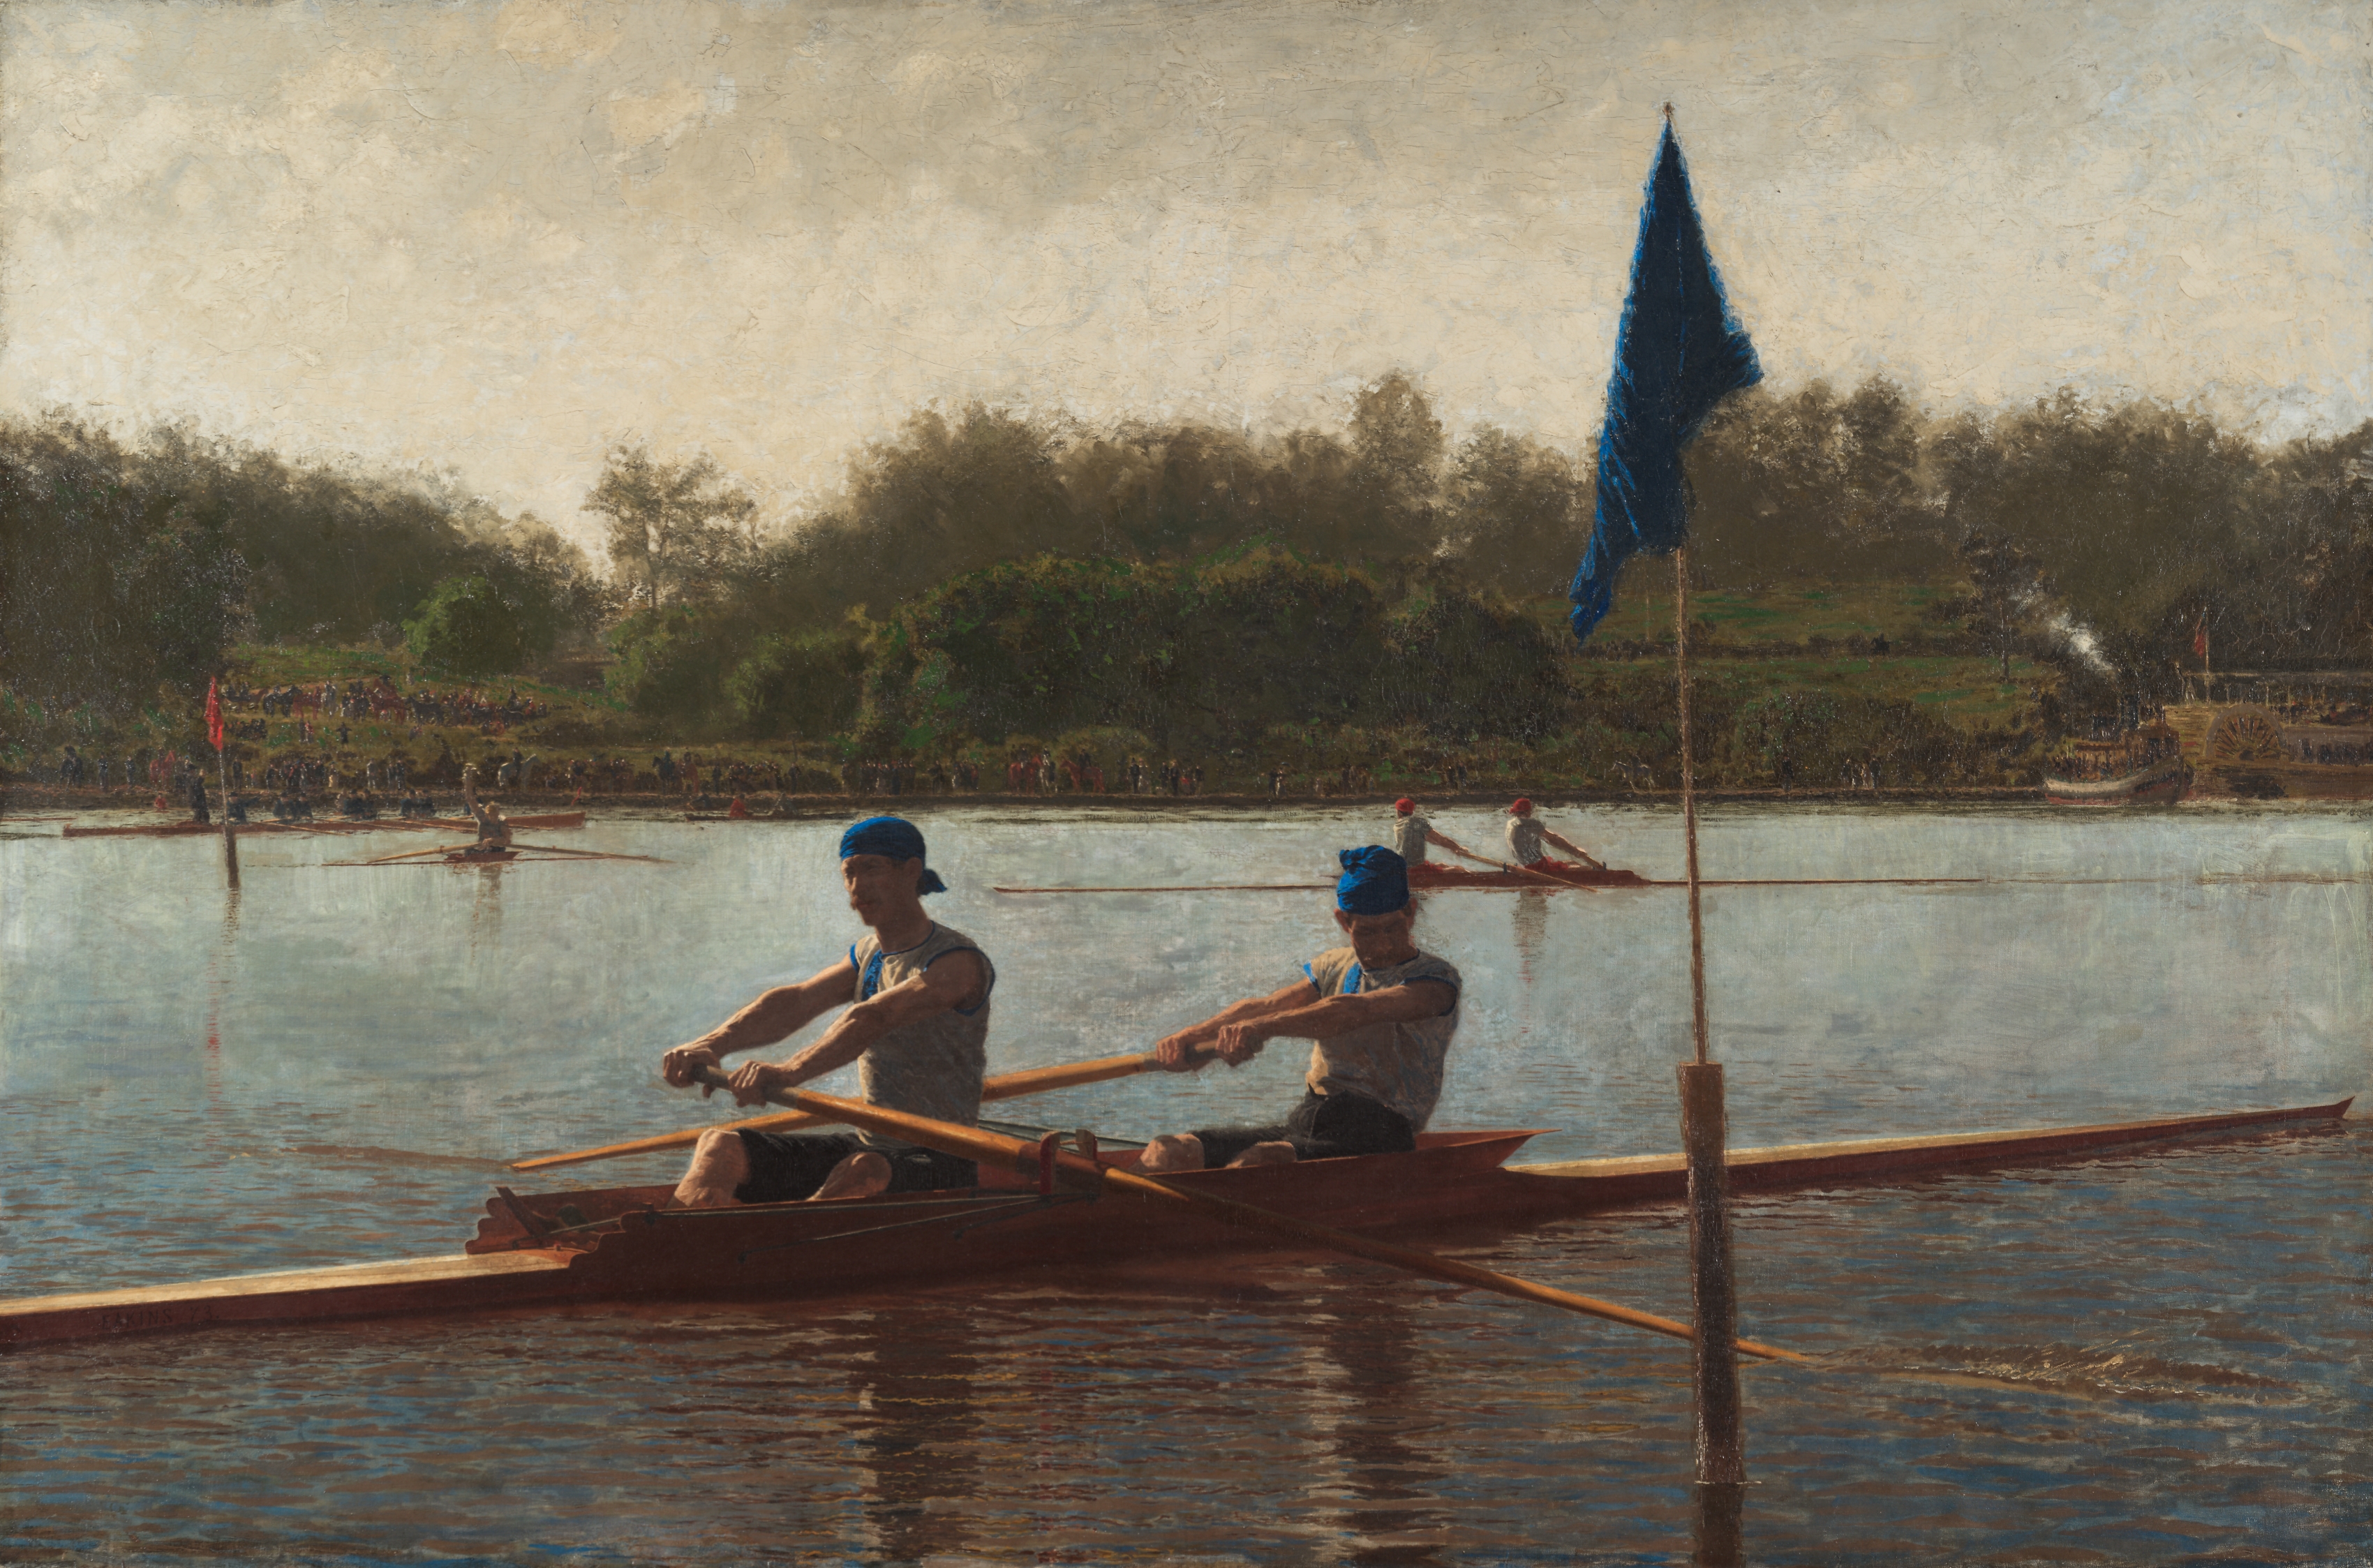 The Biglin Brothers Turning the Stake by Thomas Eakins - 1873 - 101.3 x 151.4 cm Cleveland Museum of Art